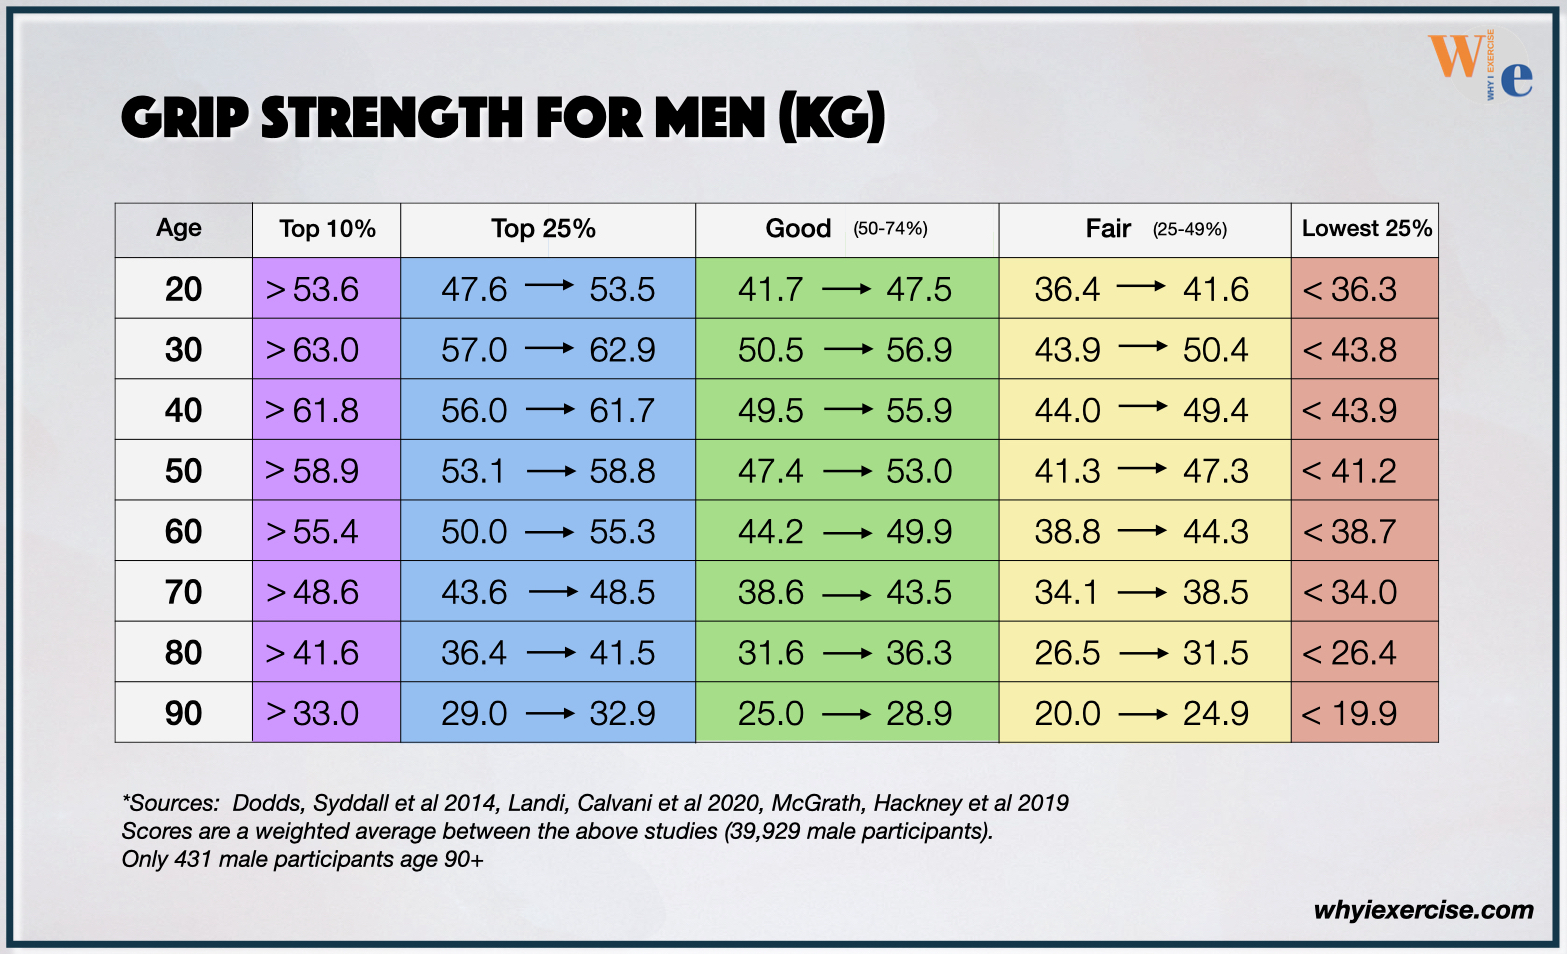 Age-group men's grip strength charts with percentile scores, in kg.